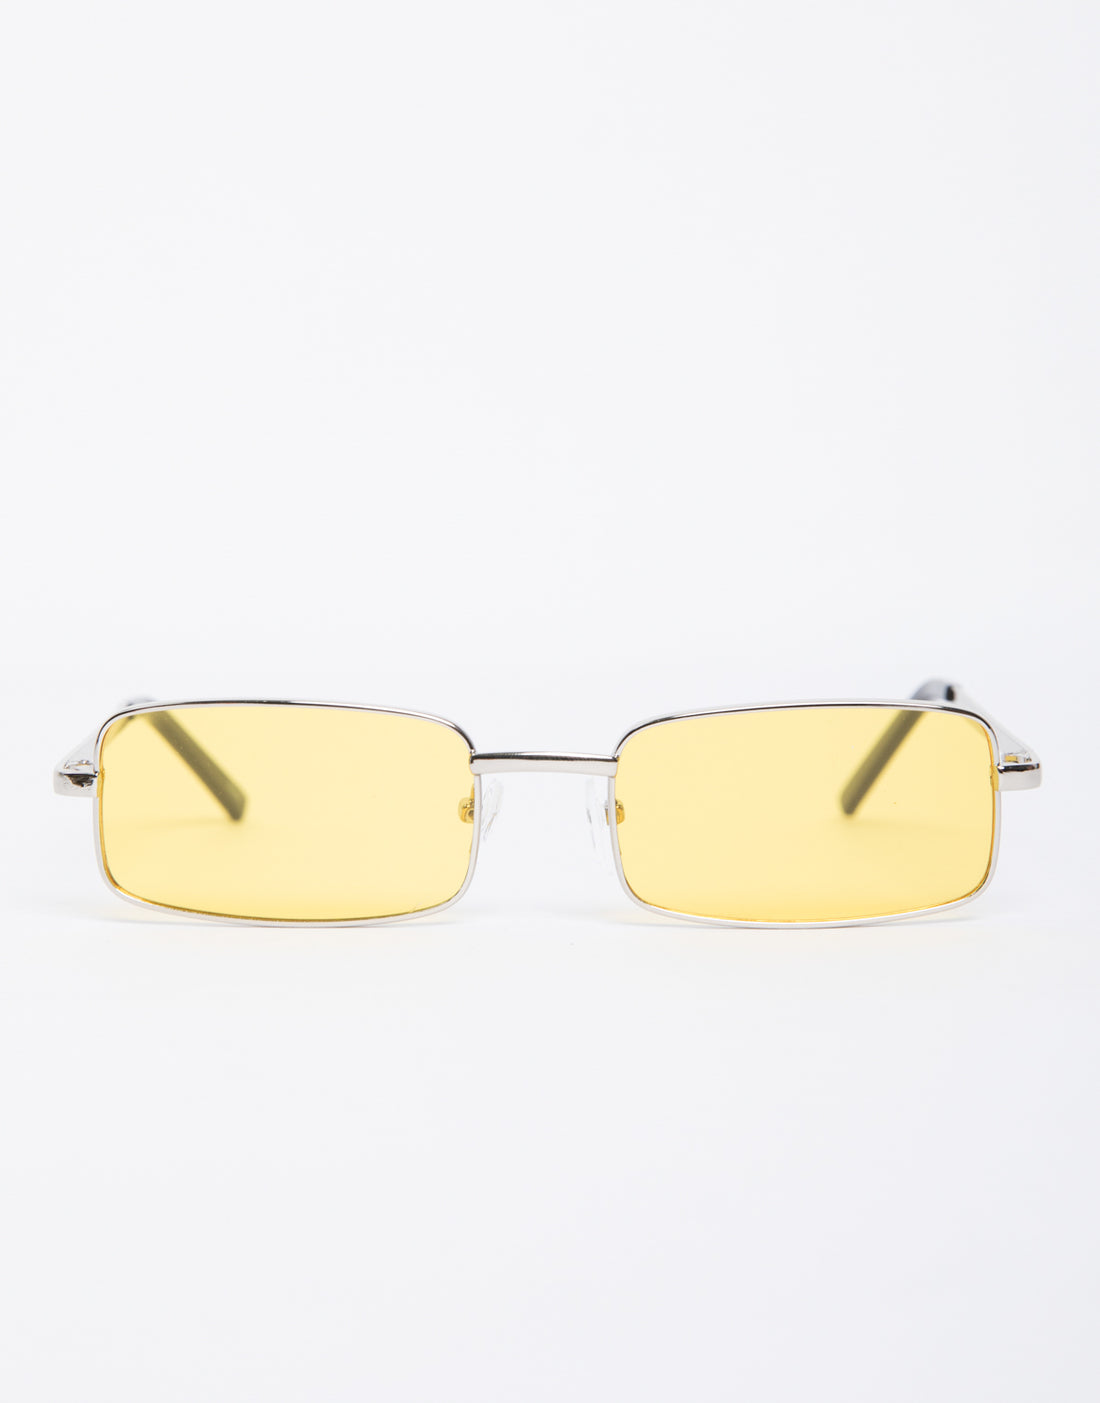 Festival Ready Sunnies Accessories Yellow One Size -2020AVE